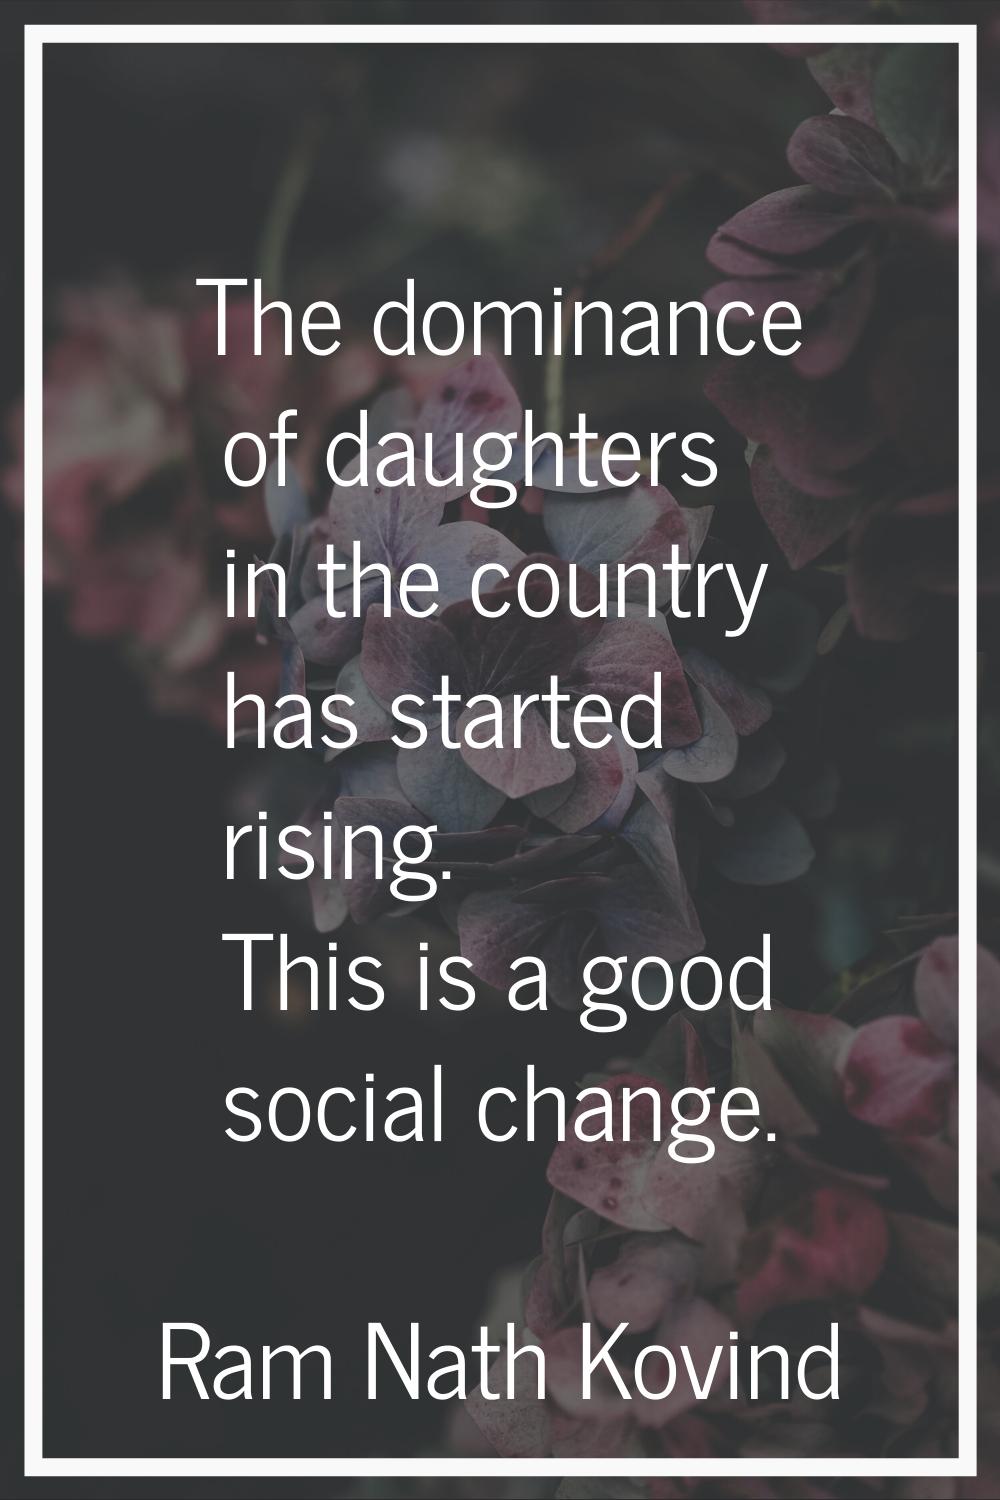 The dominance of daughters in the country has started rising. This is a good social change.